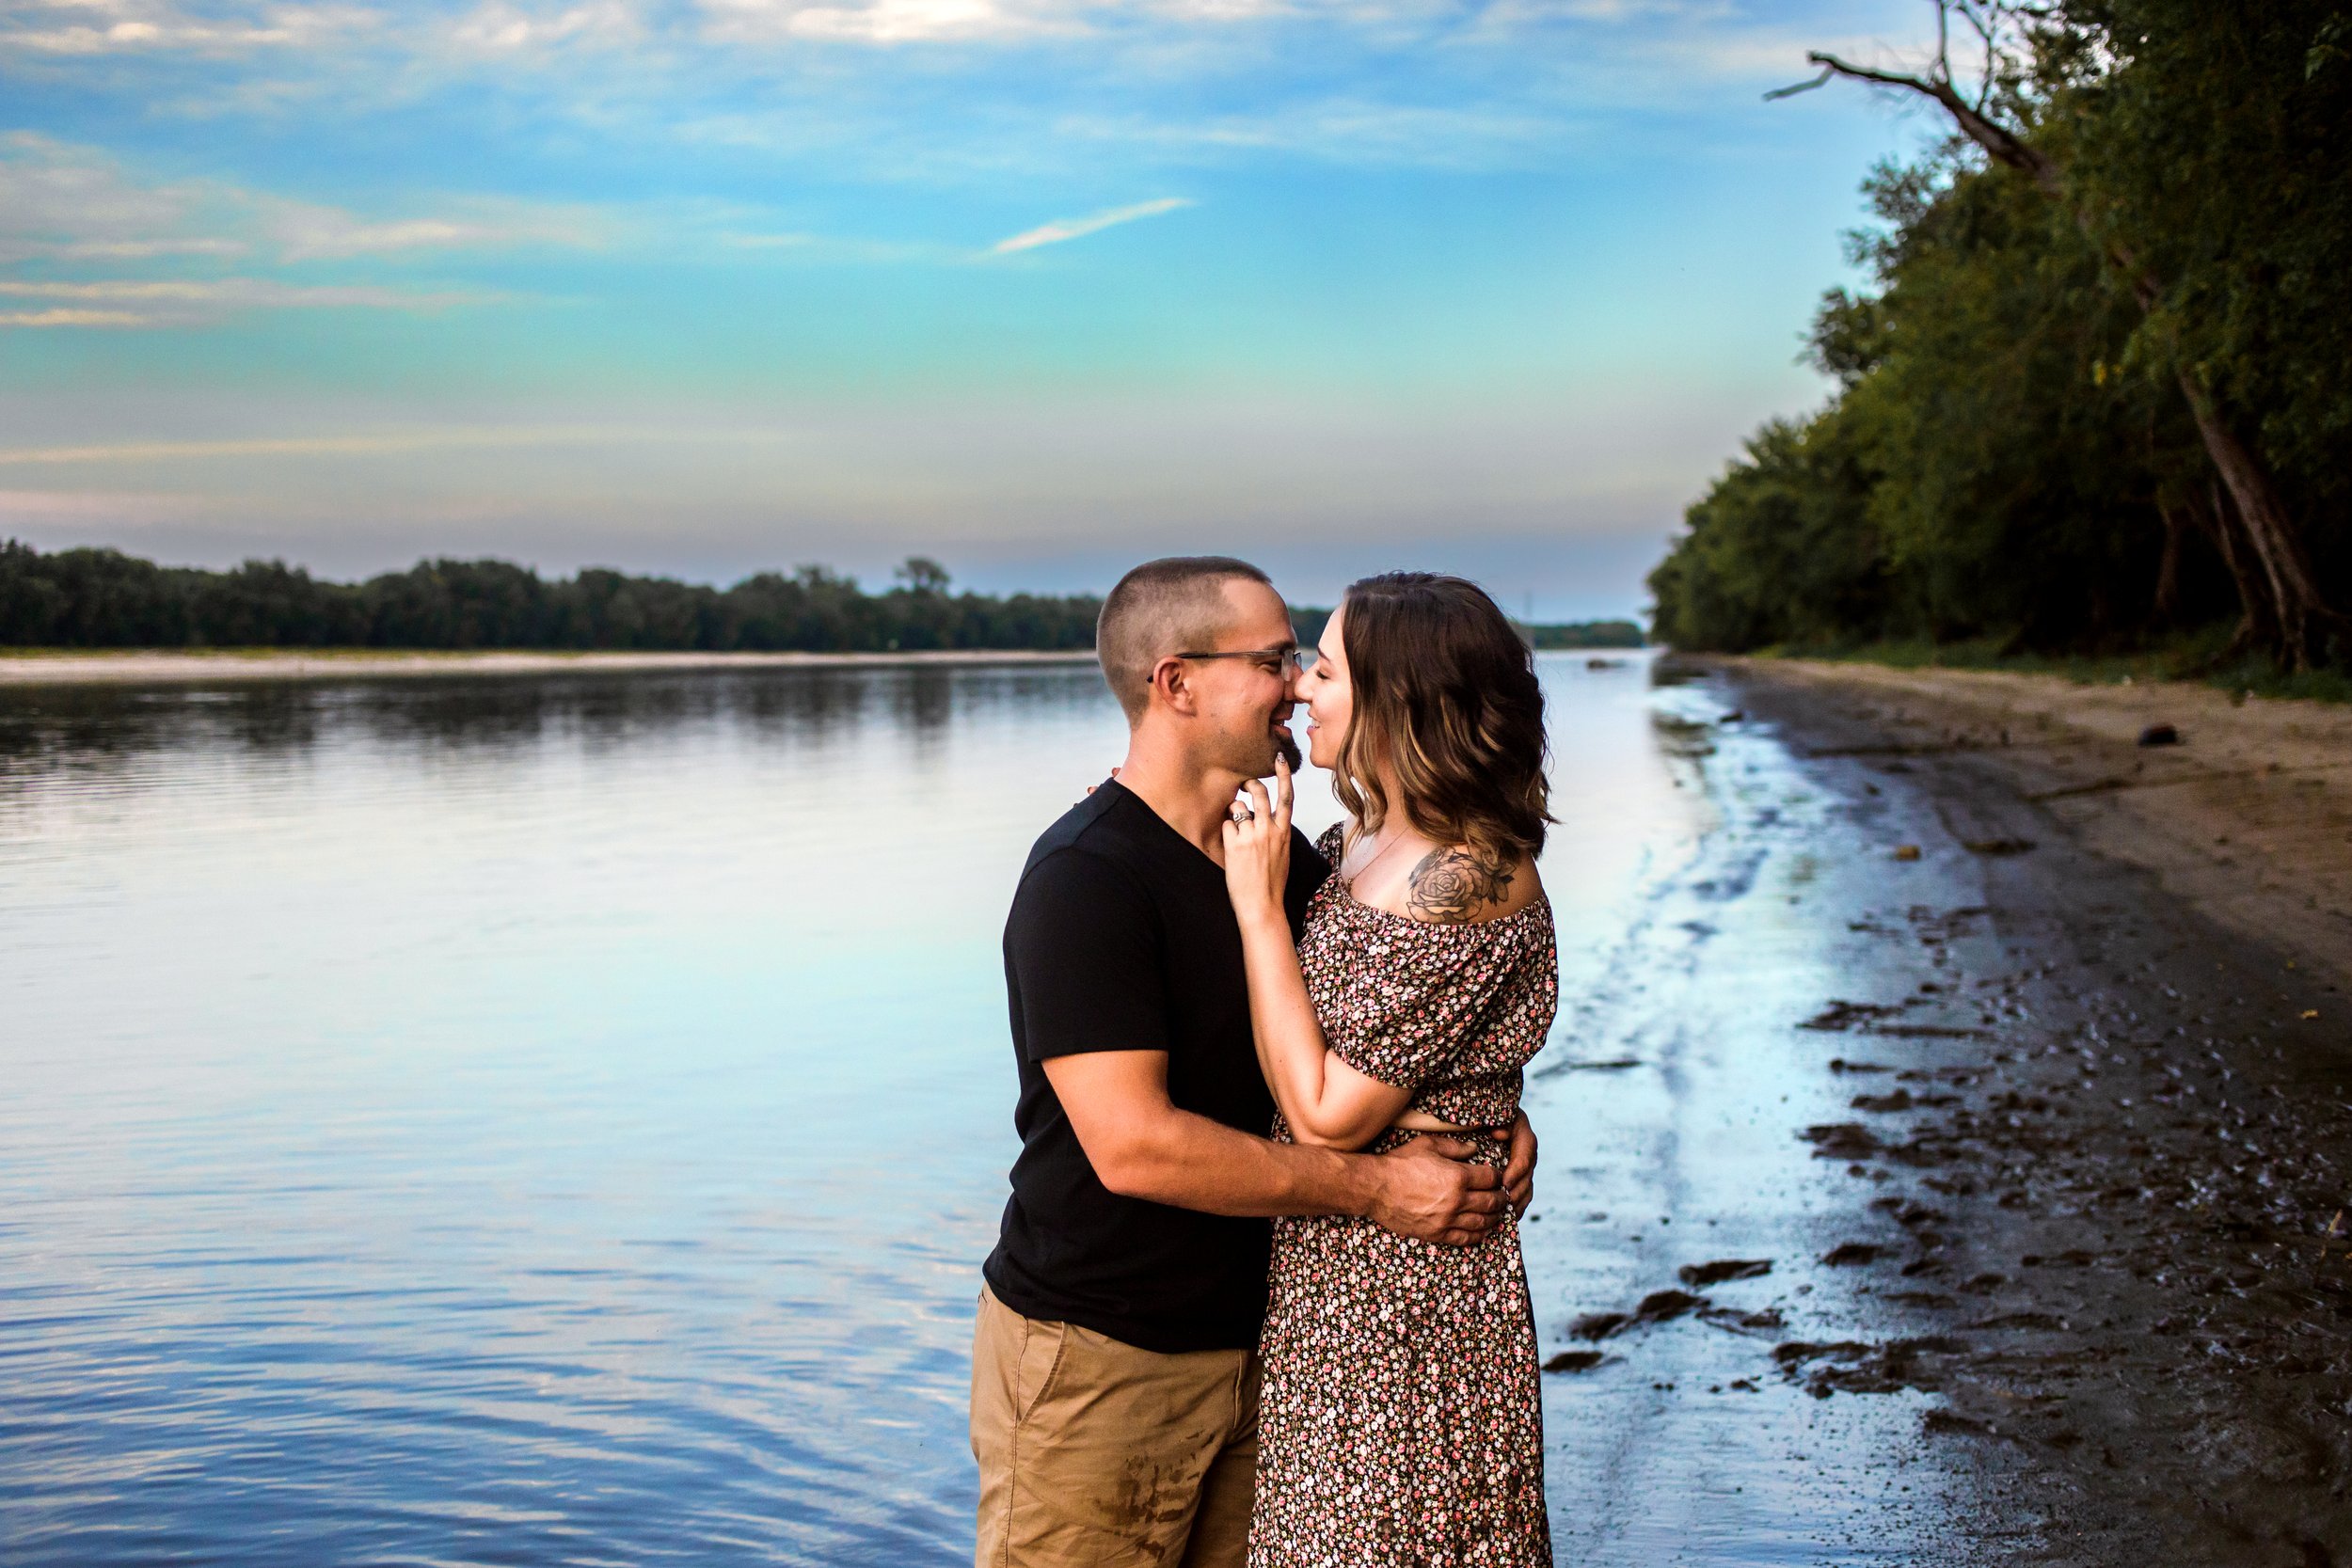  Husband and wife kiss next to a river with stunning sunset sky behind them by Teala Ward Photography. sunset kissing pictures #TealaWardPhotography #TealaWardFamilies #IllinoisRiverPhotography #IllinoisFamilyPhotography #familylifestylepics 